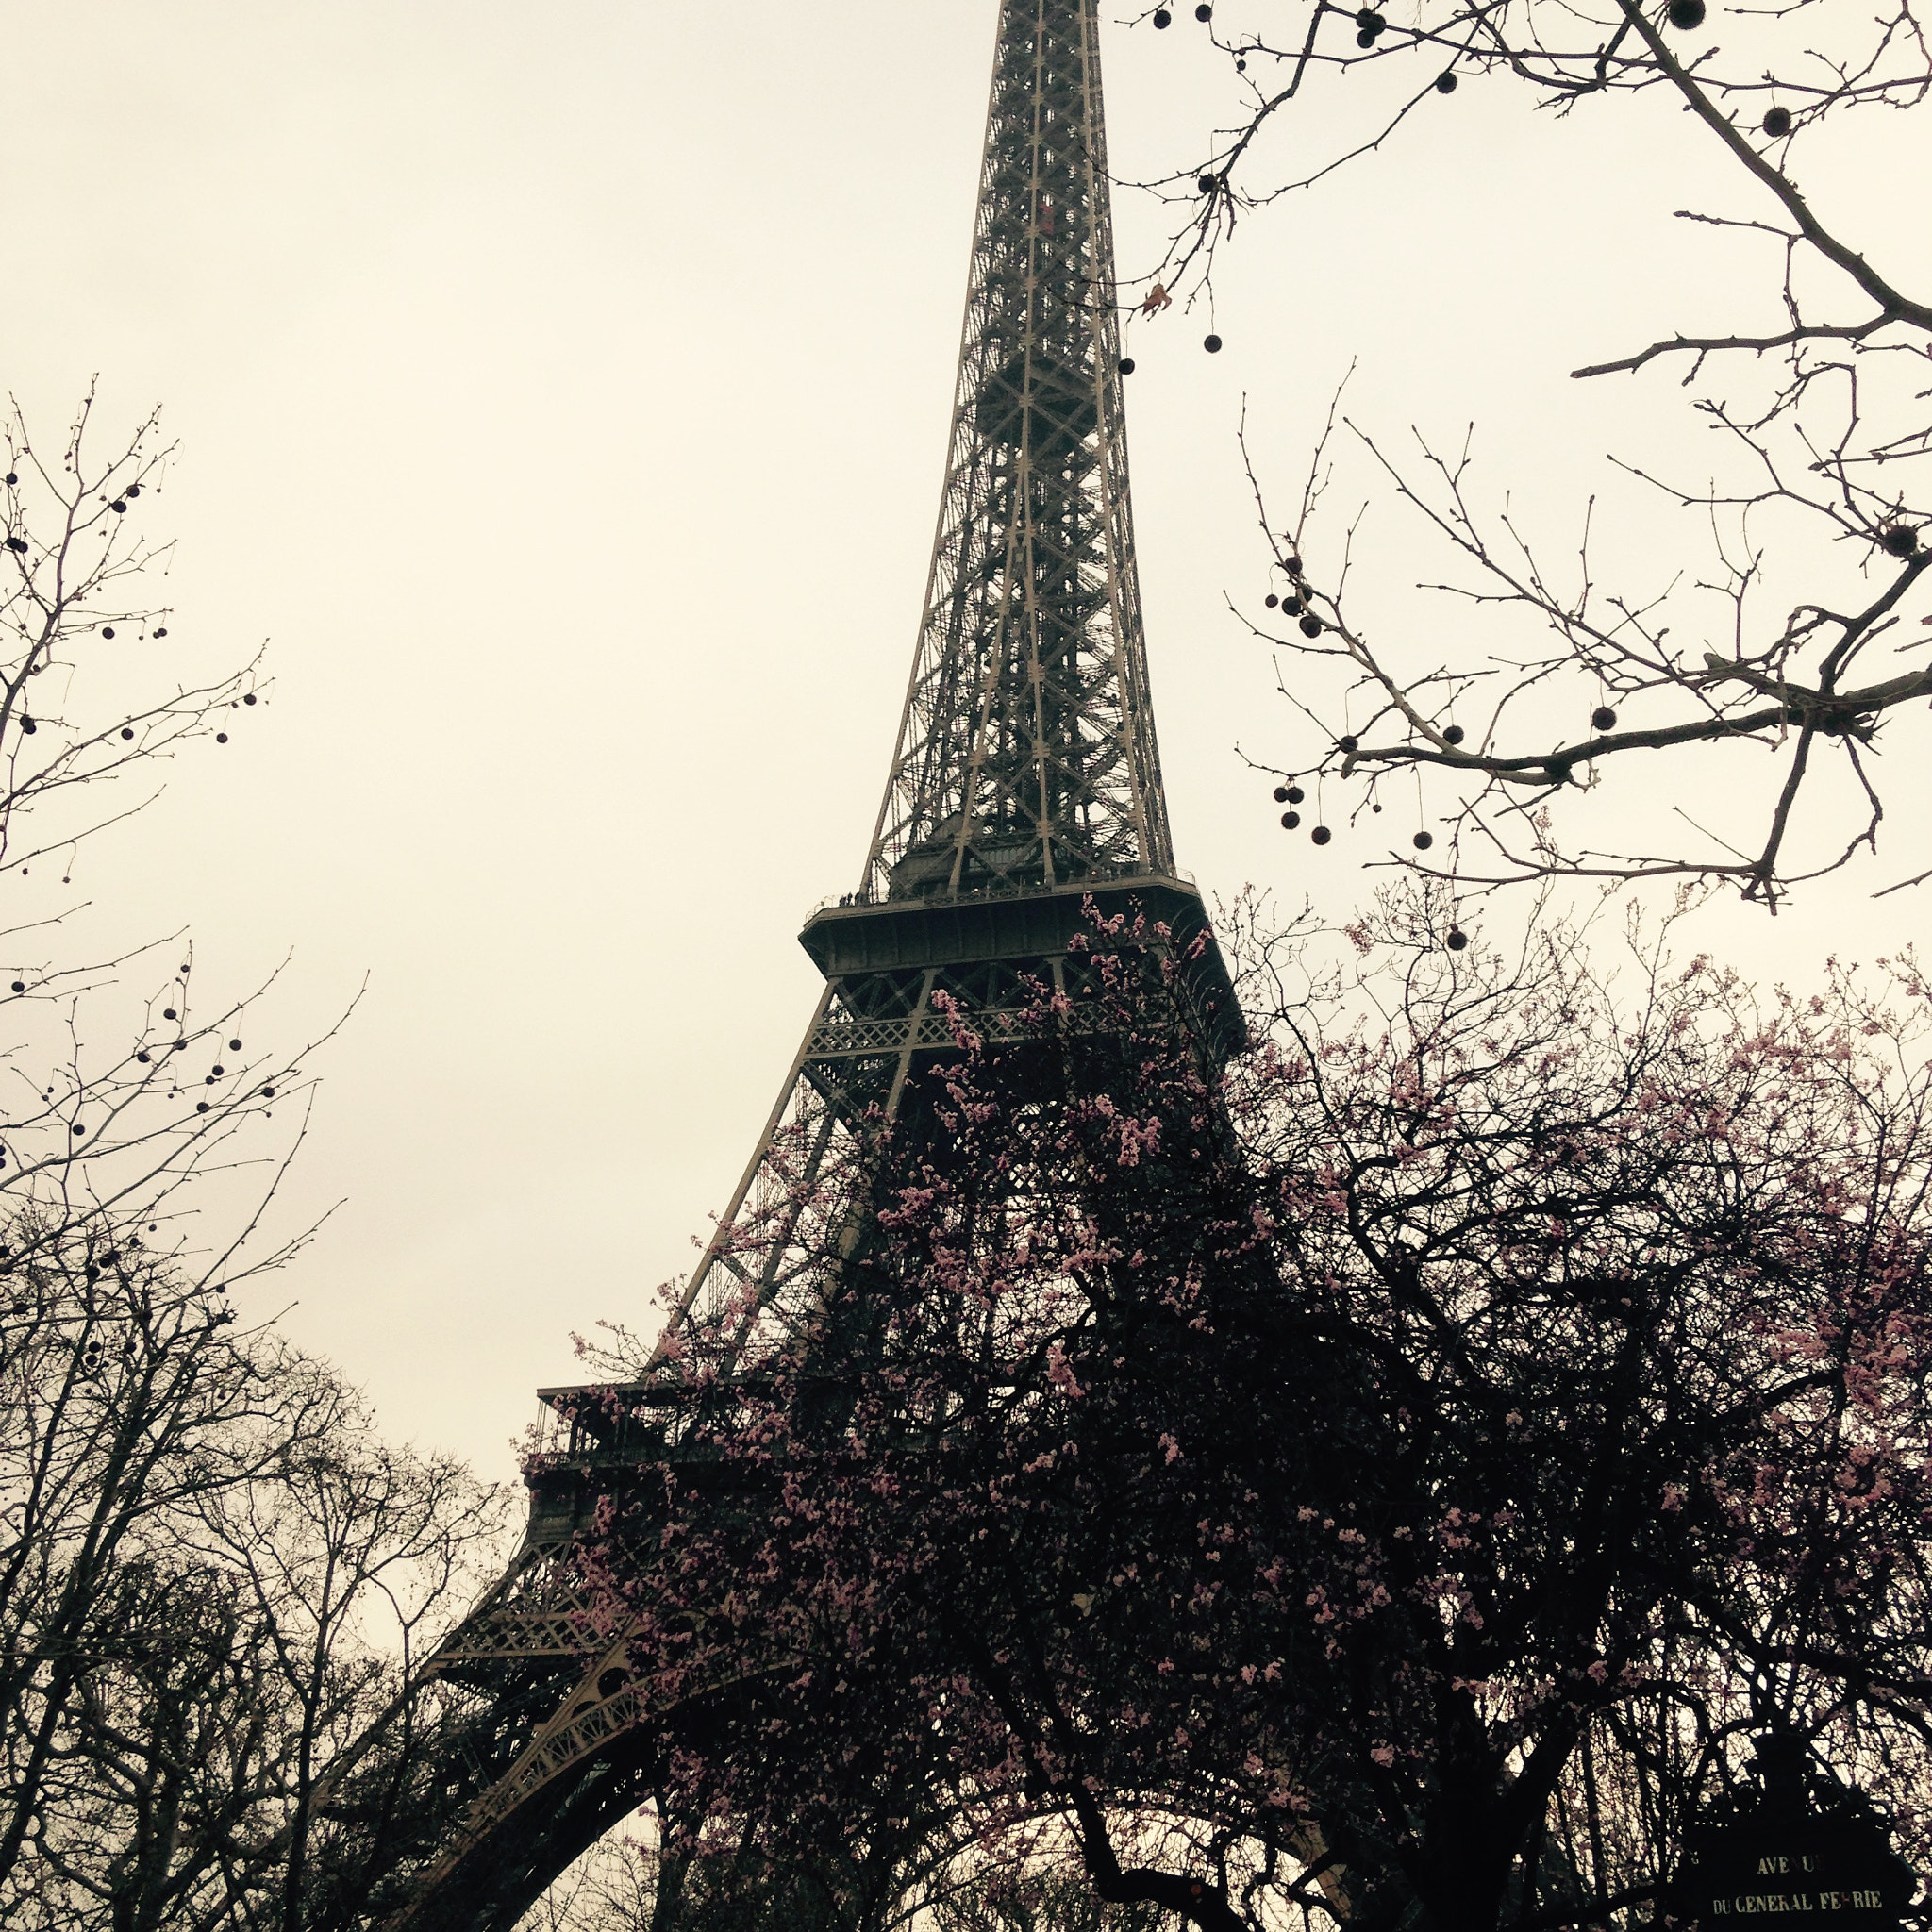 Apple iPhone 5c sample photo. Eiffel tower side view photography